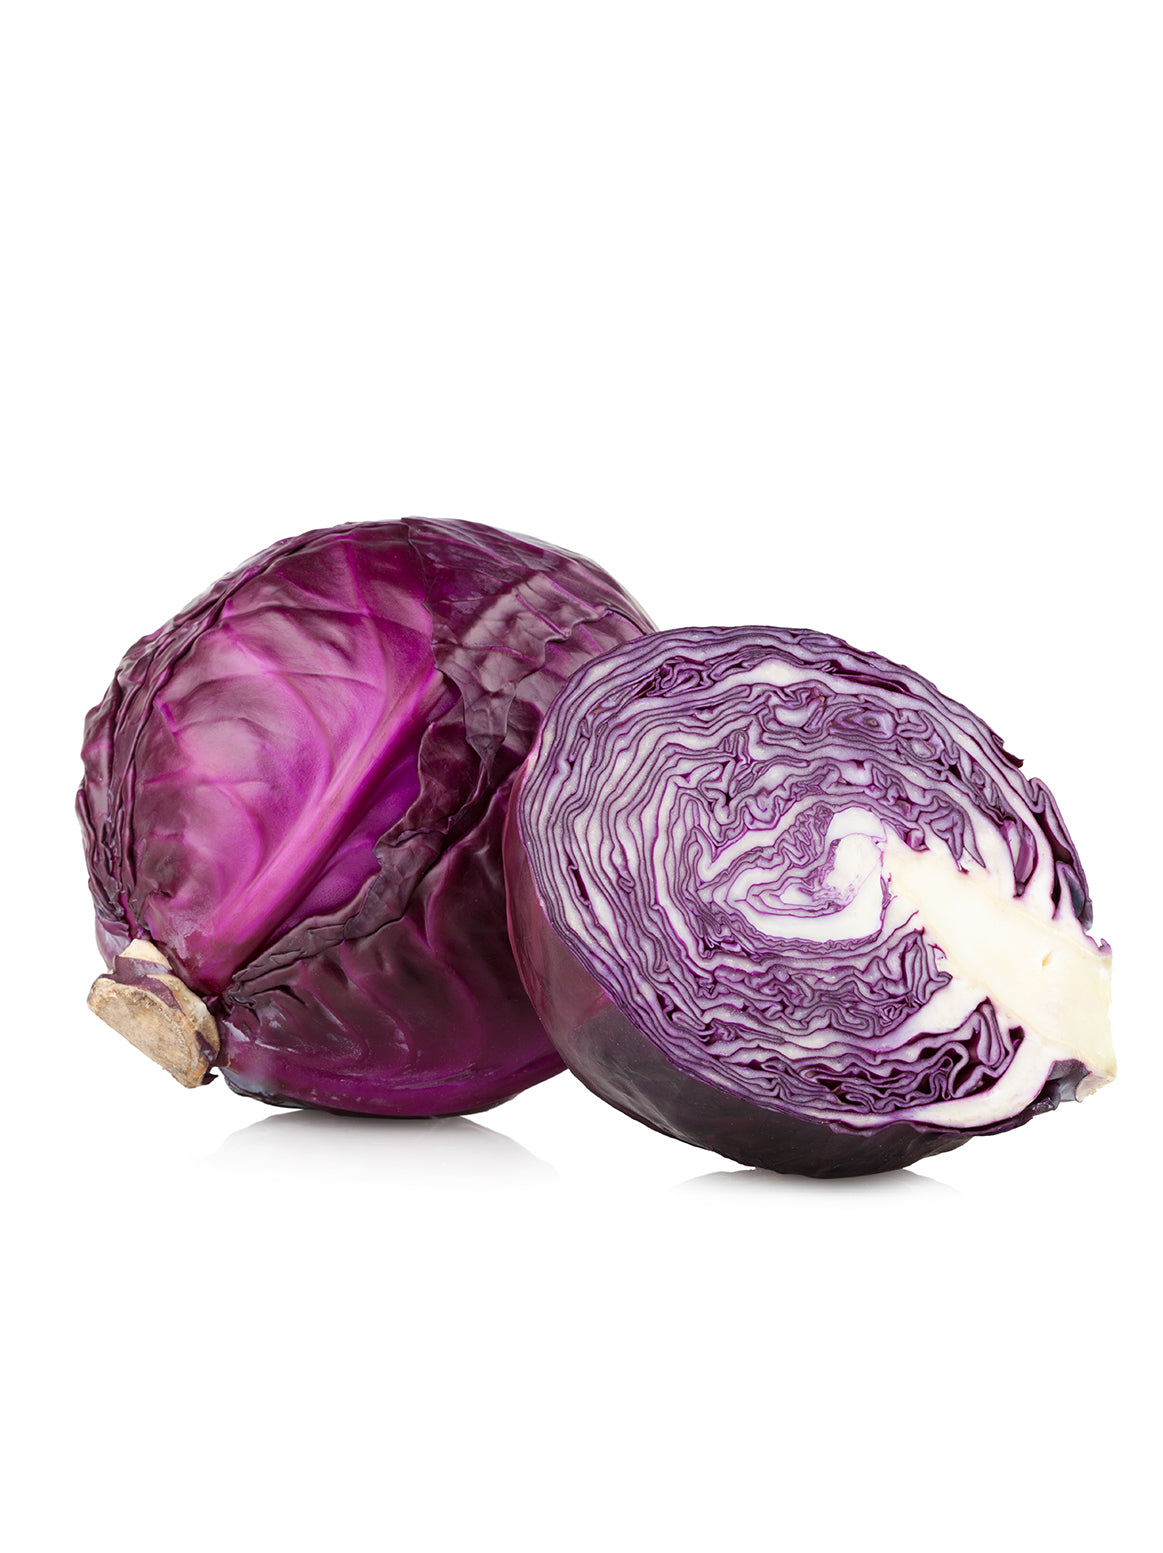 Cabbage Red - Head